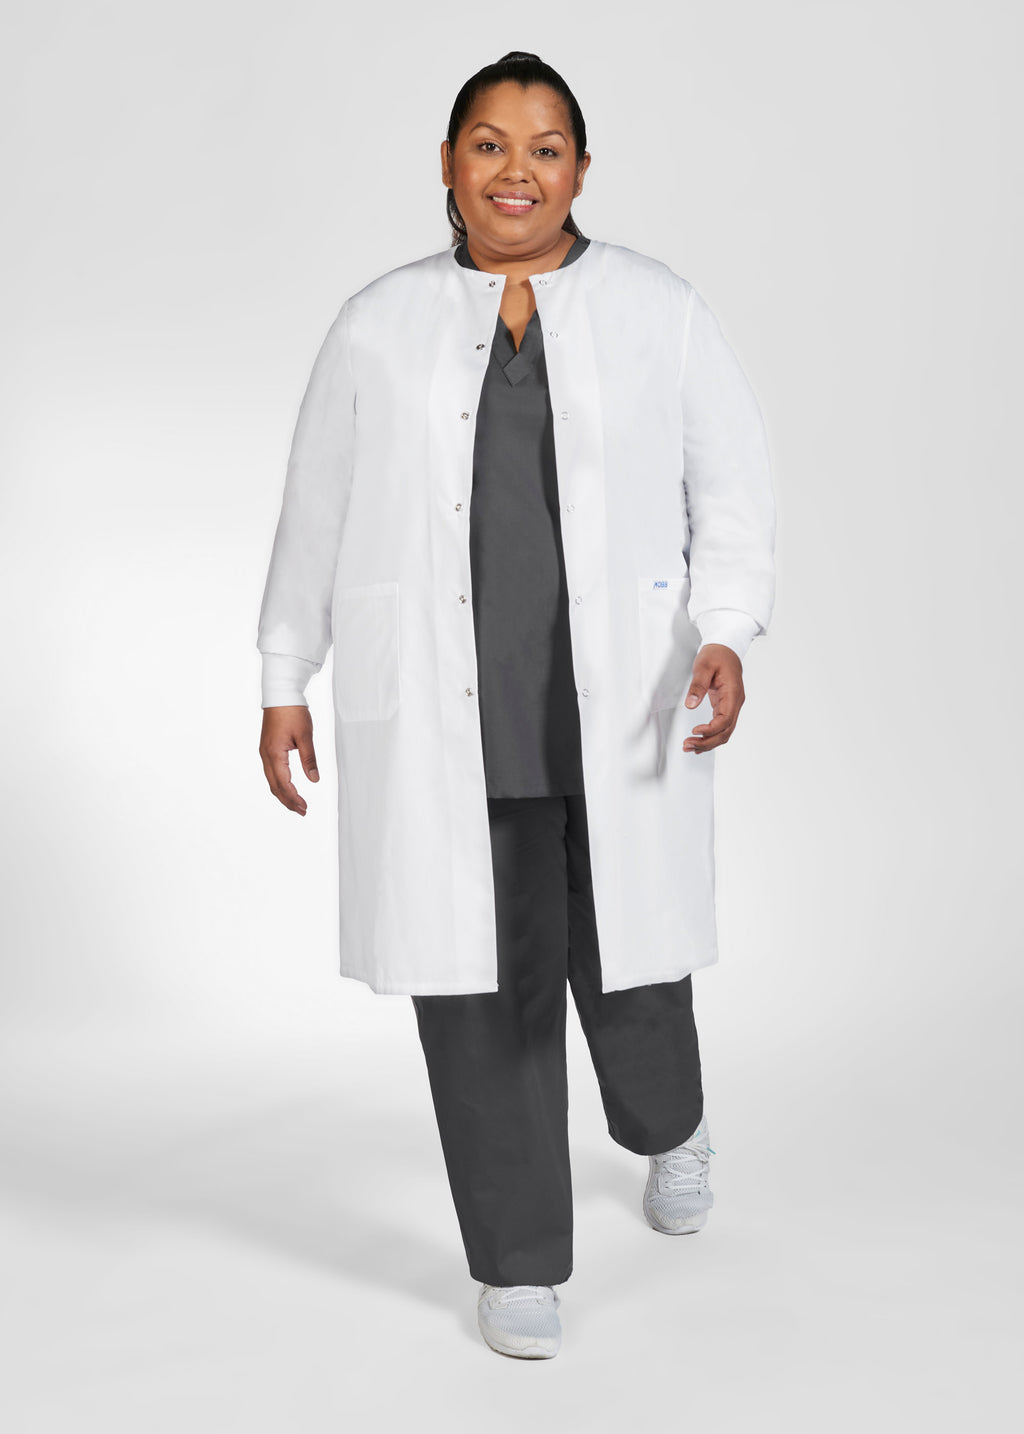 Product - MOBB Full Length Unisex Snap Lab Coat With Knitted Cuffs